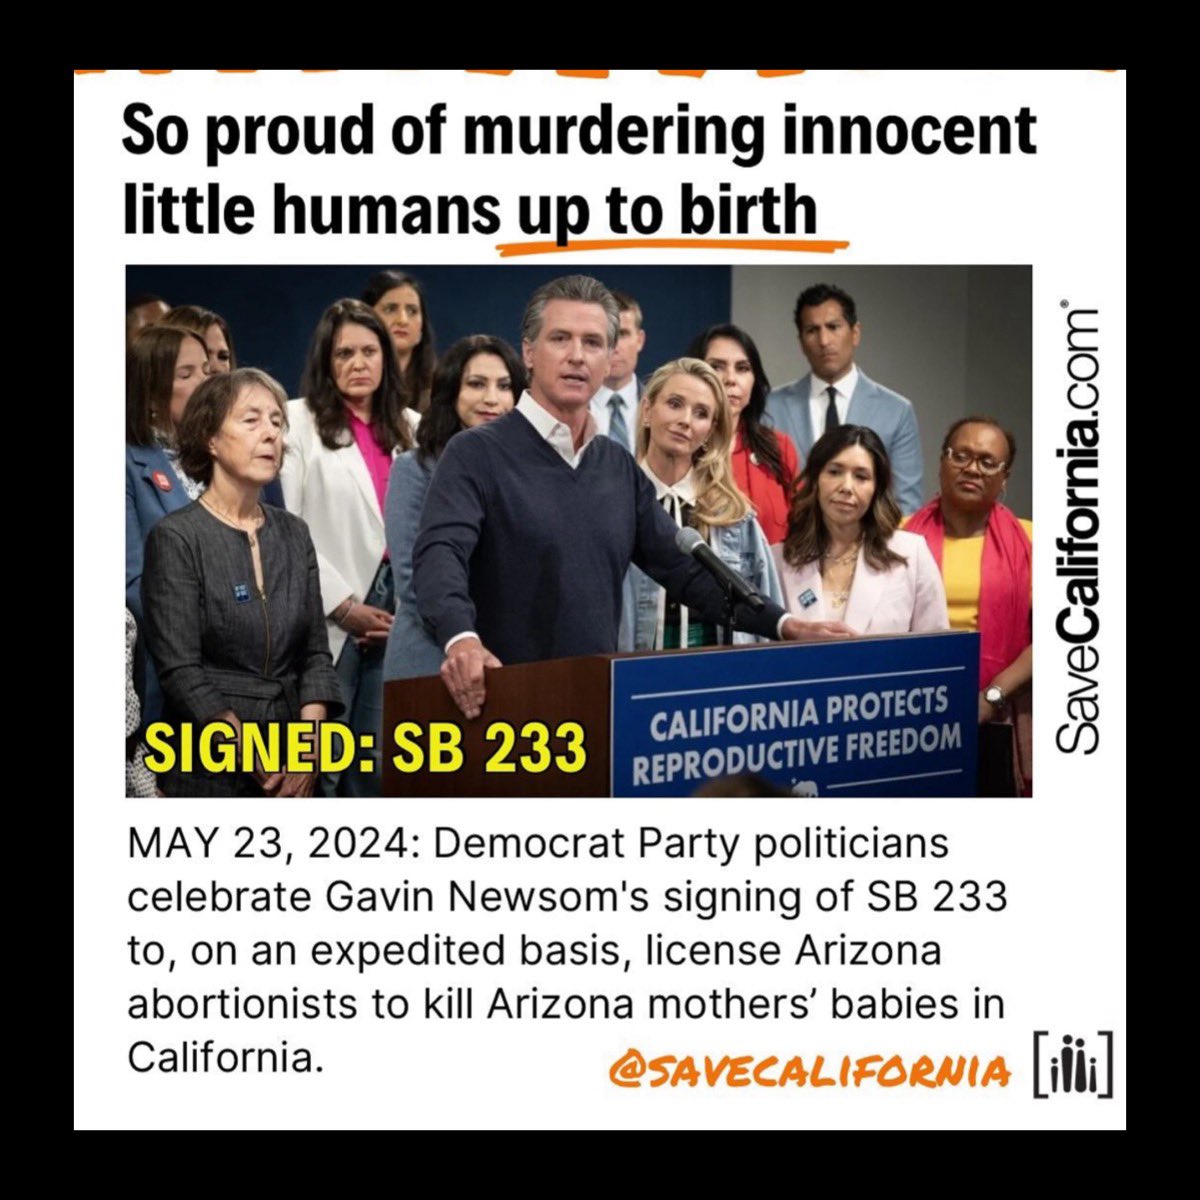 This allows AZ doctors abortion and abortion related healthcare to AZ patients traveling to California. Abortion is not healthcare. Governor Newsom is evil in my opinion. Thoughts?